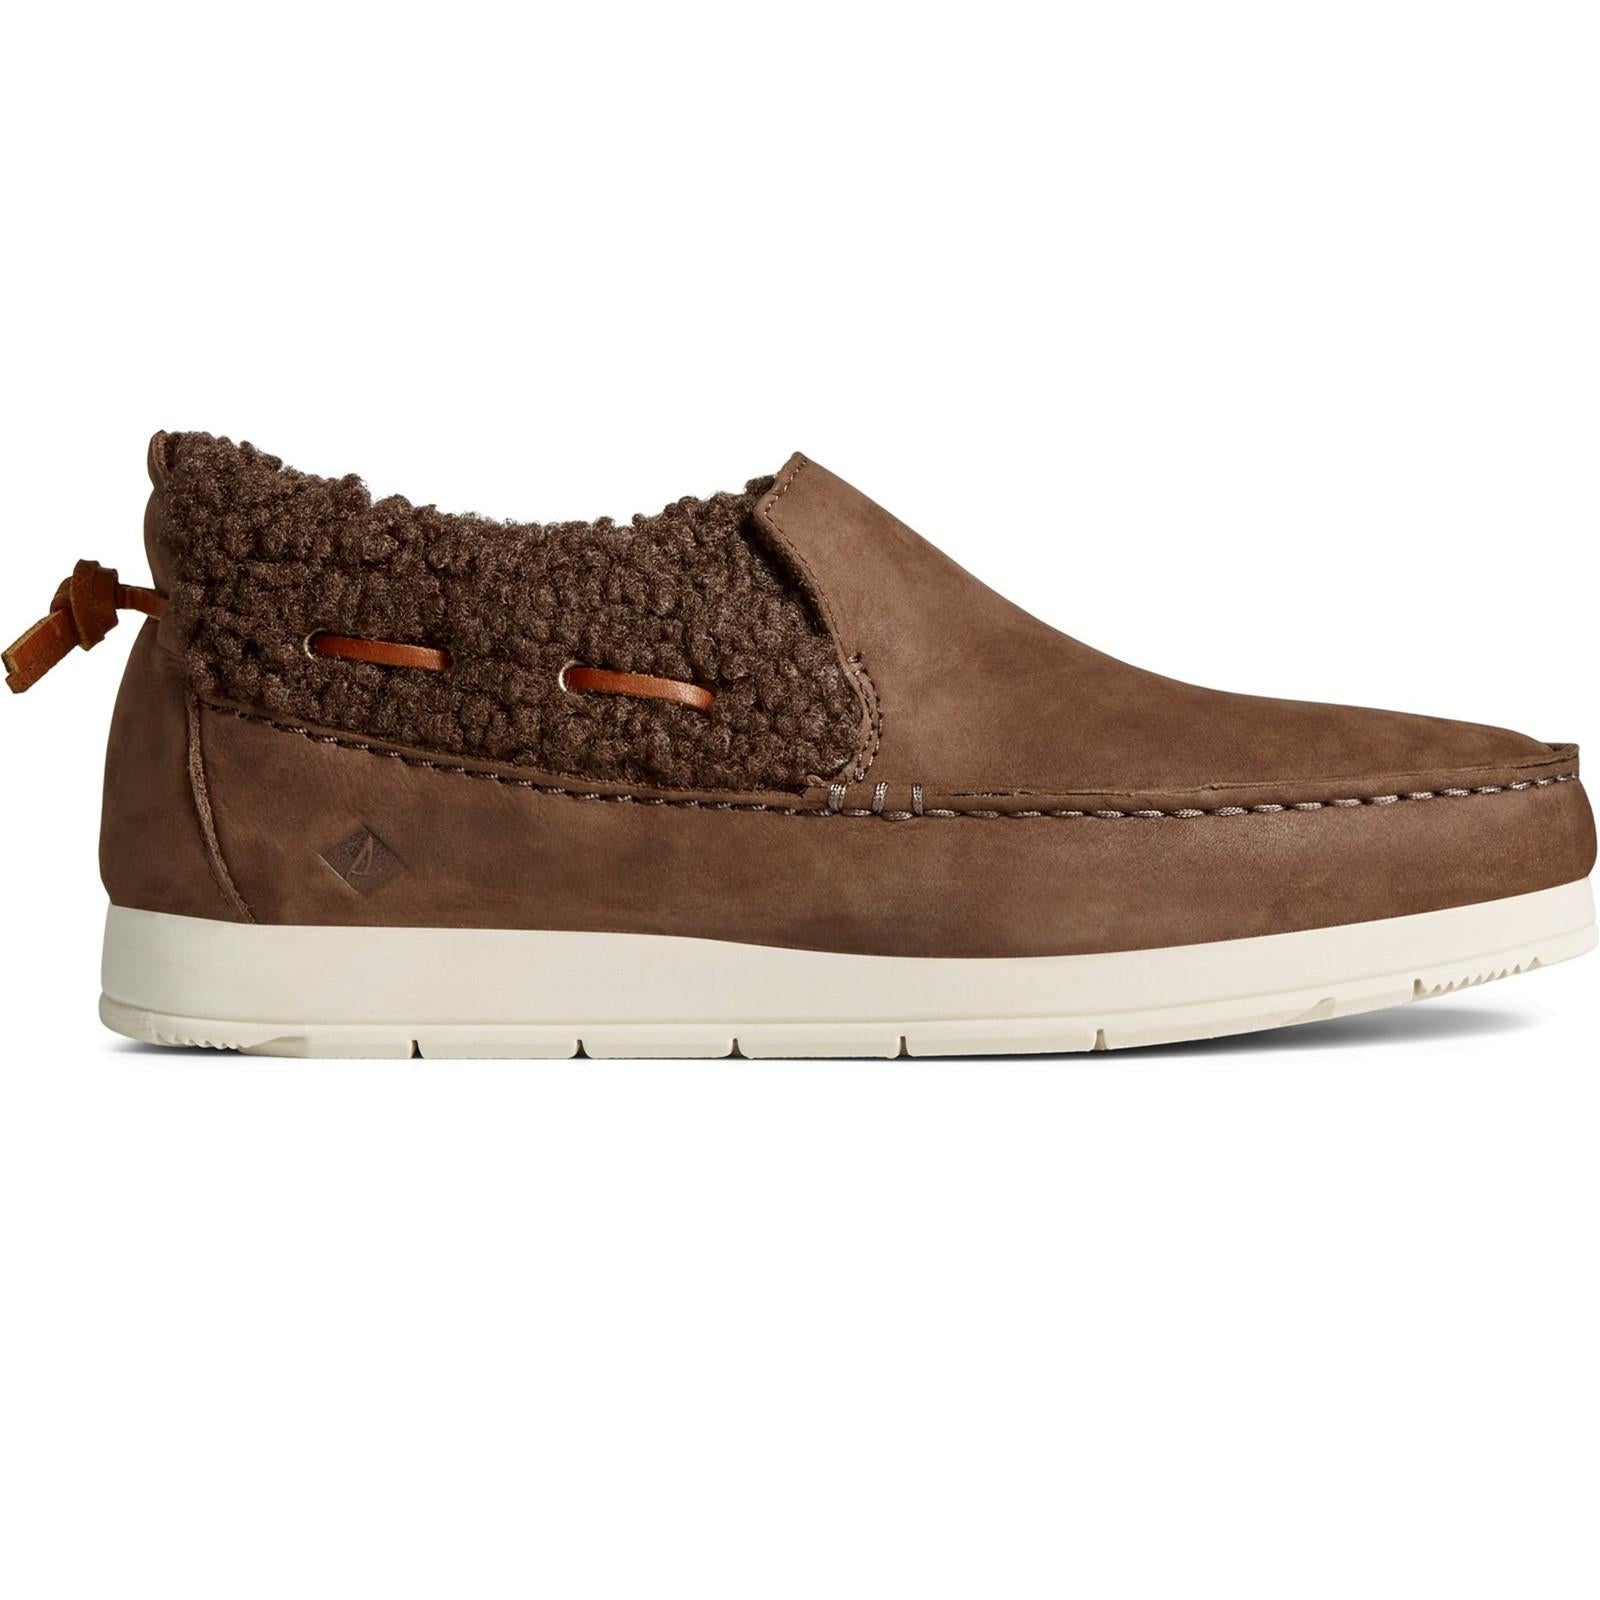 Sperry Top-sider Moc-Sider Leather Teddy Shoe